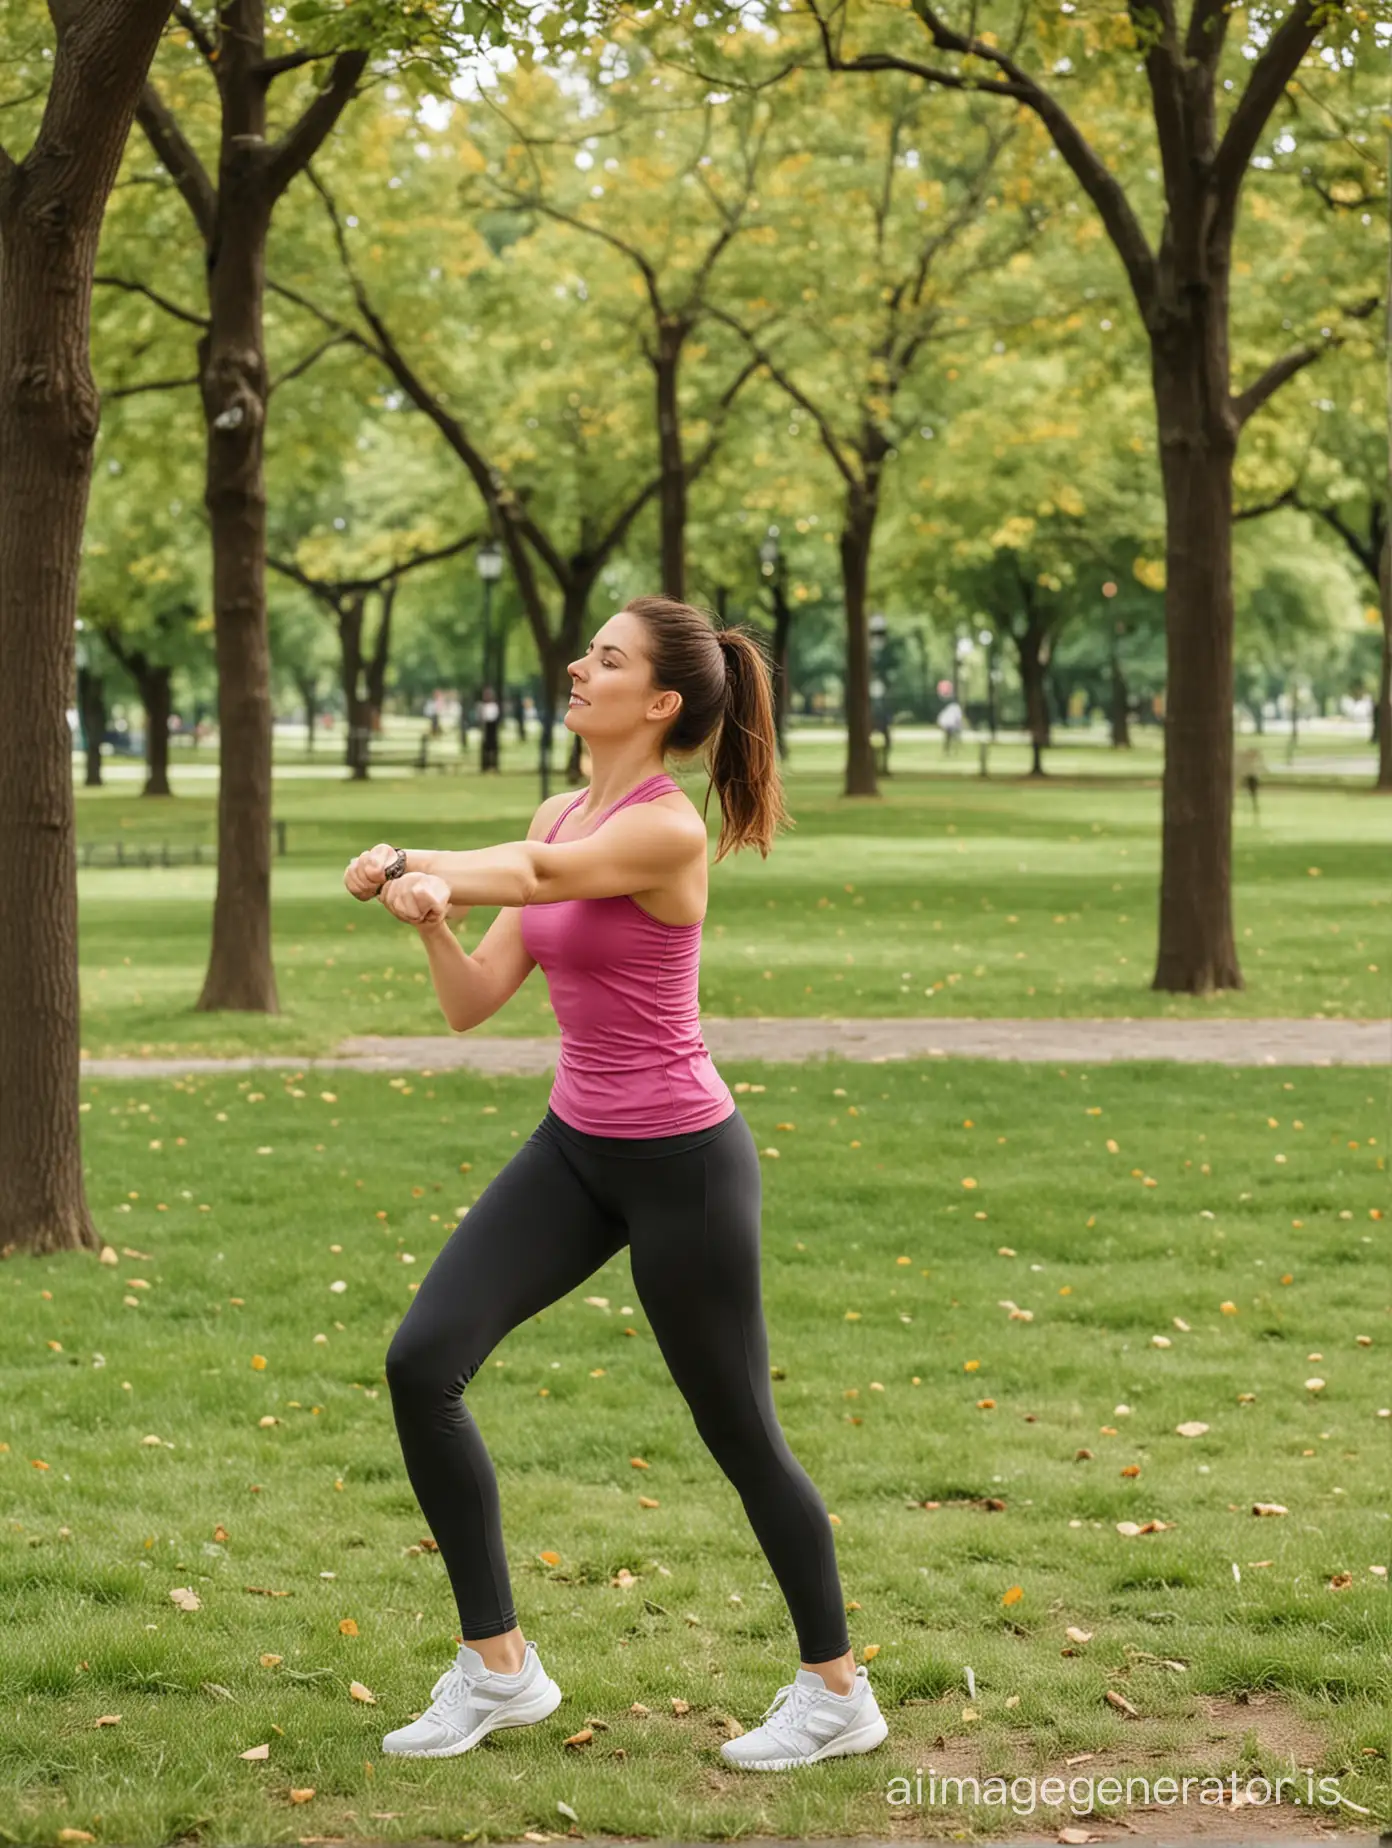 Woman-Exercising-with-Yoga-Poses-in-a-Vibrant-Park-Setting